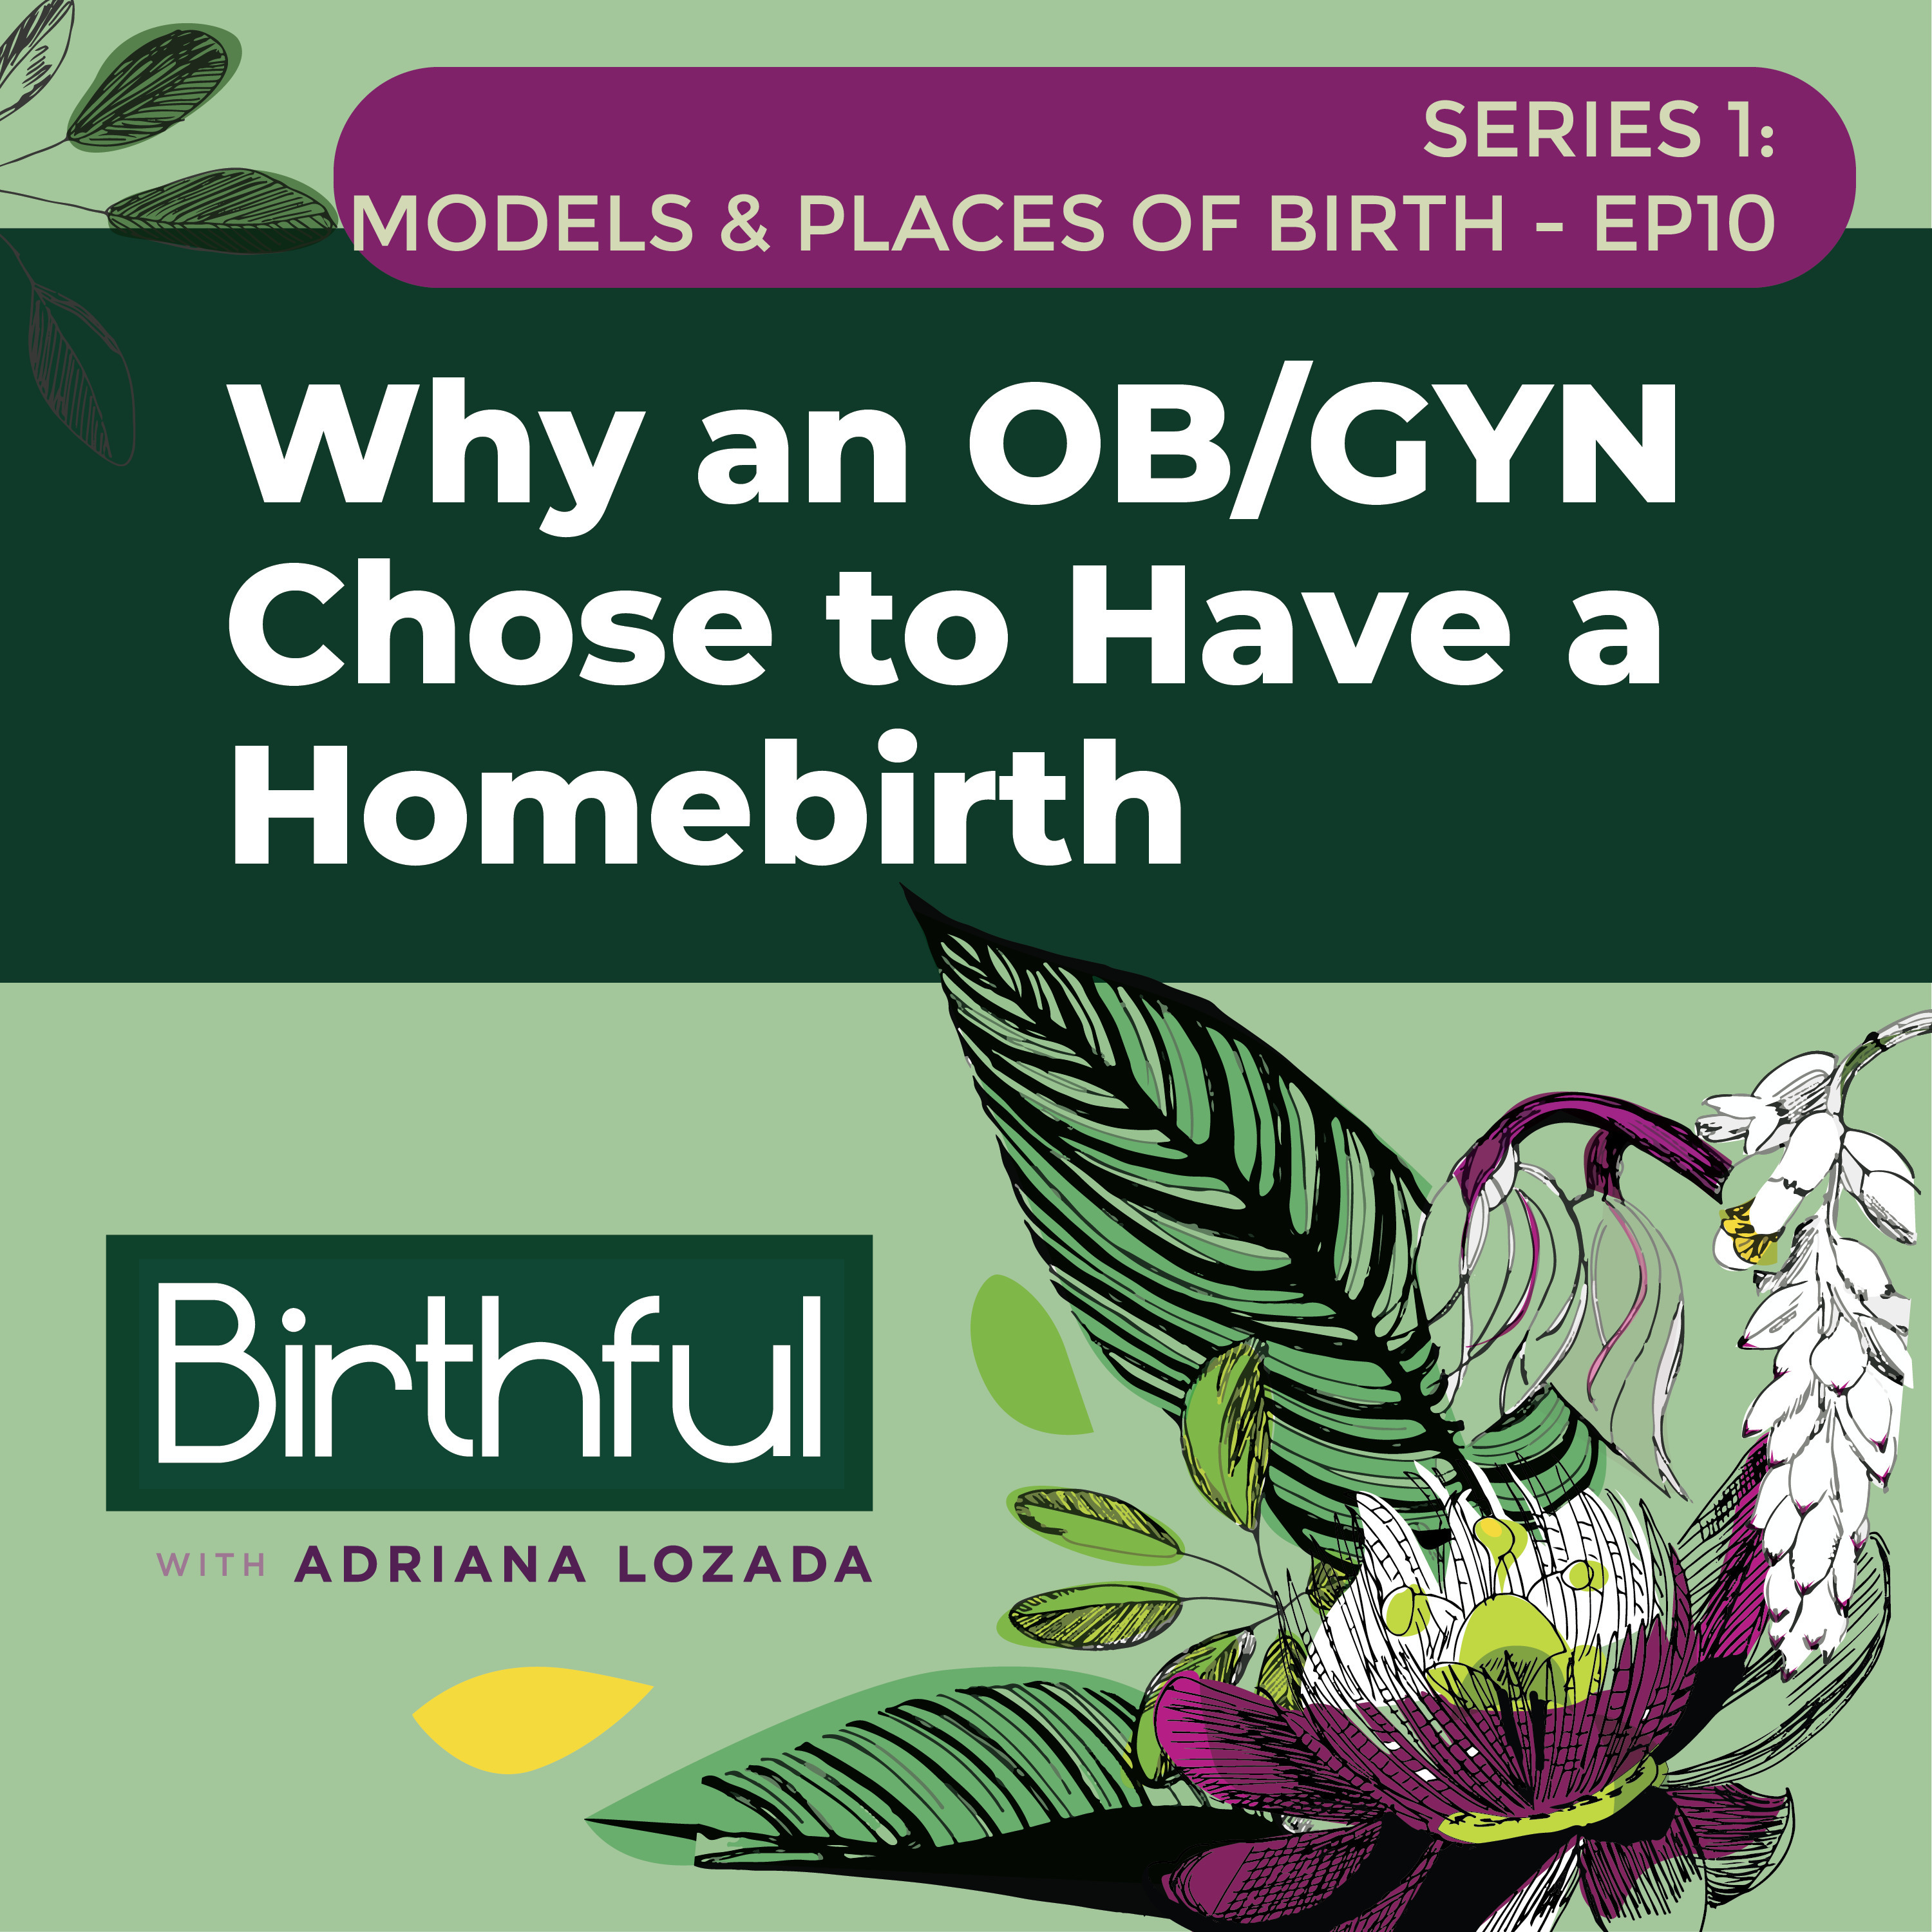 Why an OB/GYN Chose to Have a Homebirth